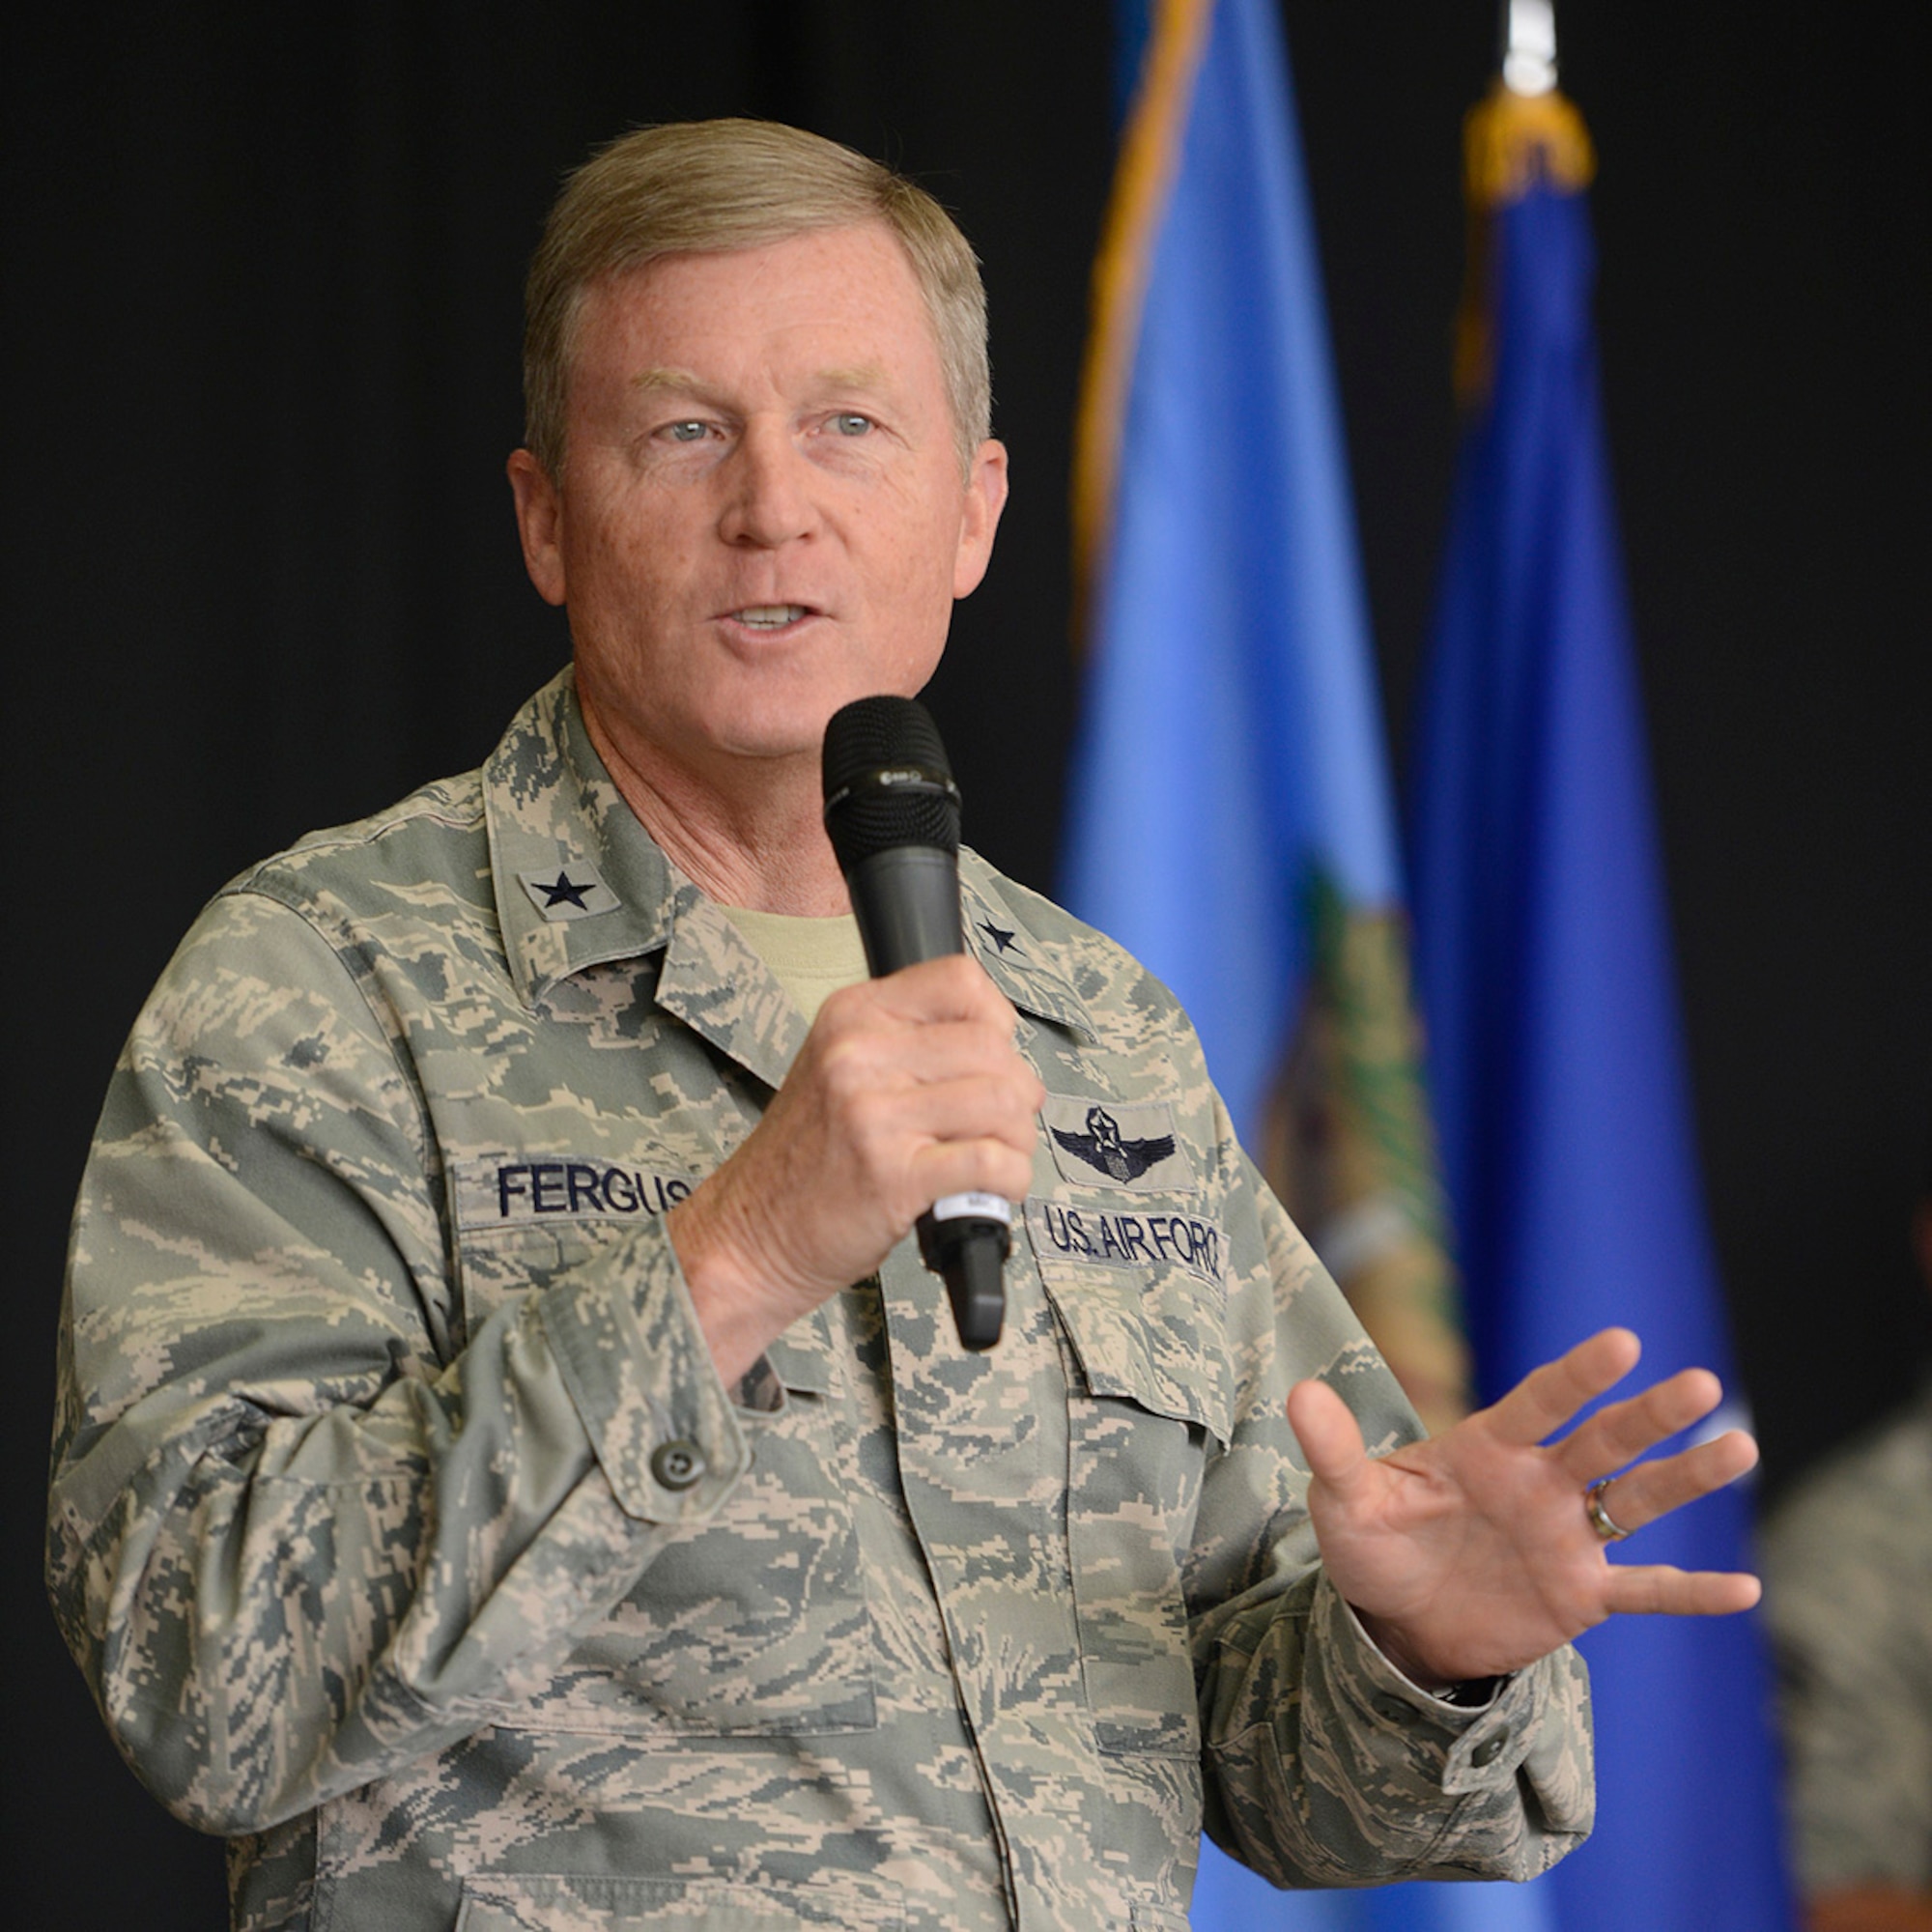 Brigadier General Greg Ferguson, Oklahoma Assistant Adjutant General Air, addresses member of the 138th Fighter Wing during a Commanders Call at the Tulsa Air National Guard base, June 8, 2014.     (U.S. National Guard photo by Master Sgt.  Mark A. Moore/Released)